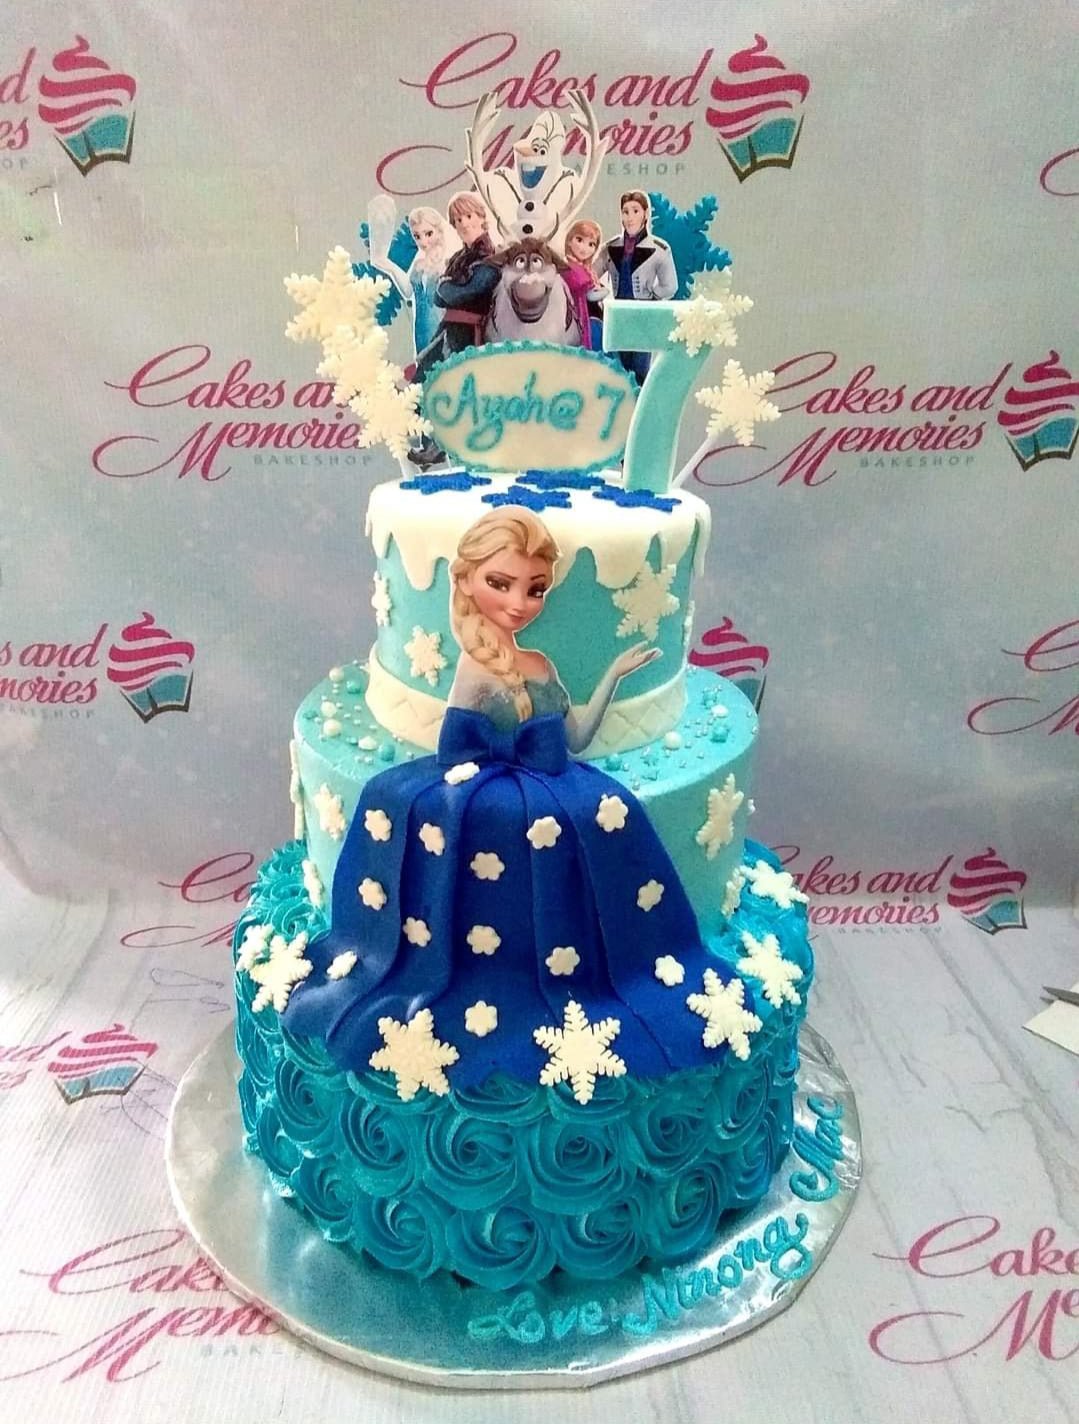 Frozen 2 Celebrity Cake 3Tier 45+serves - The Party Room For Kids